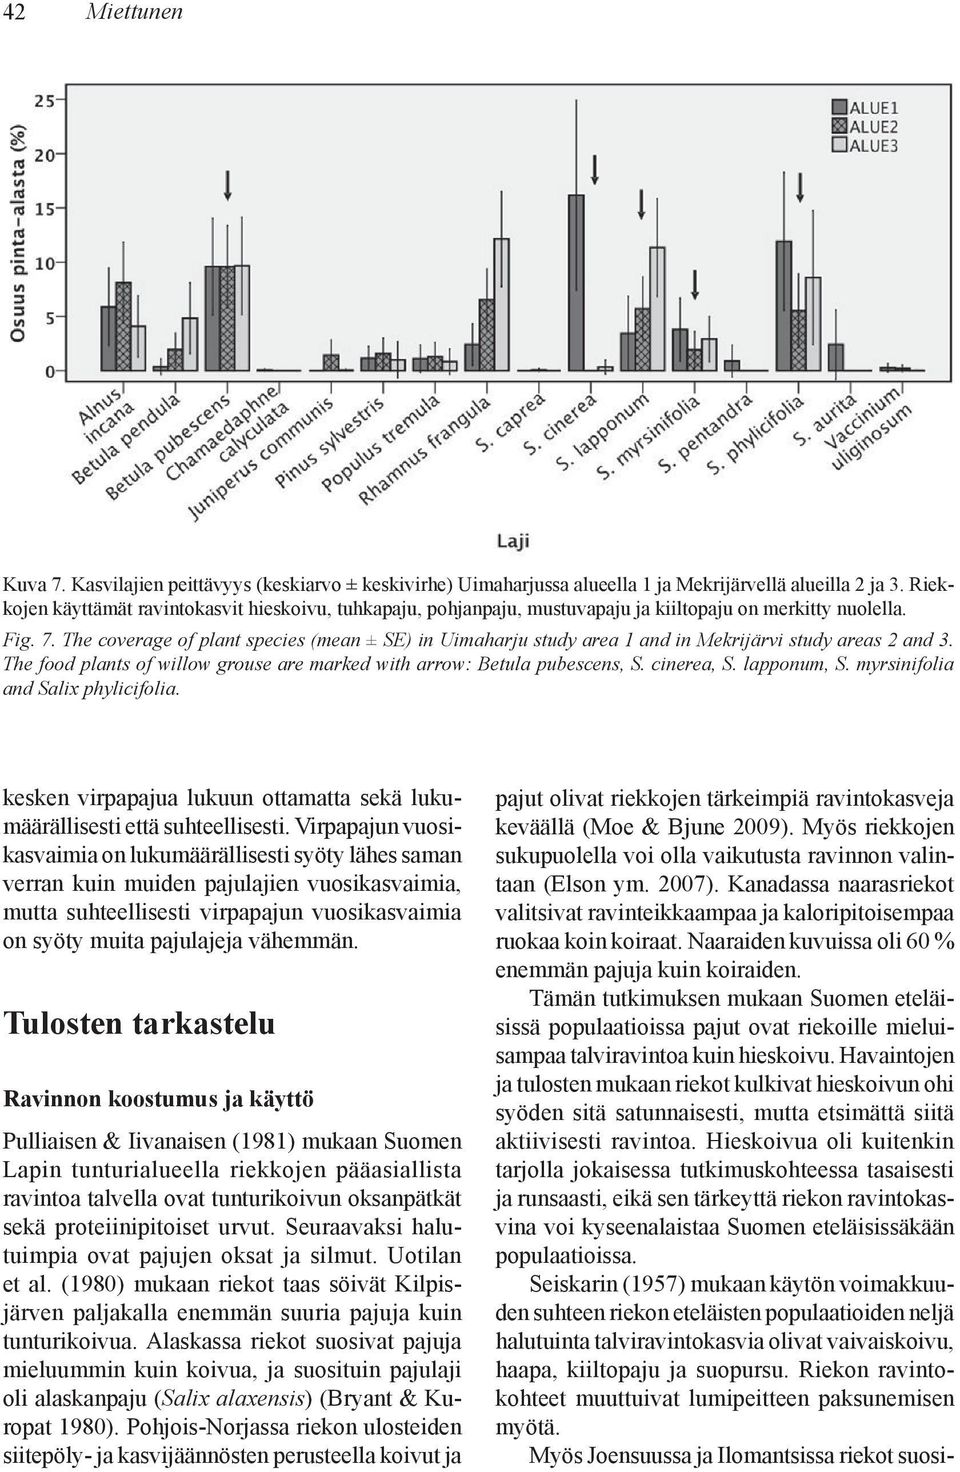 The coverage of plant species (mean ± SE) in Uimaharju study area 1 and in Mekrijärvi study areas 2 and 3. The food plants of willow grouse are marked with arrow: Betula pubescens, S. cinerea, S.